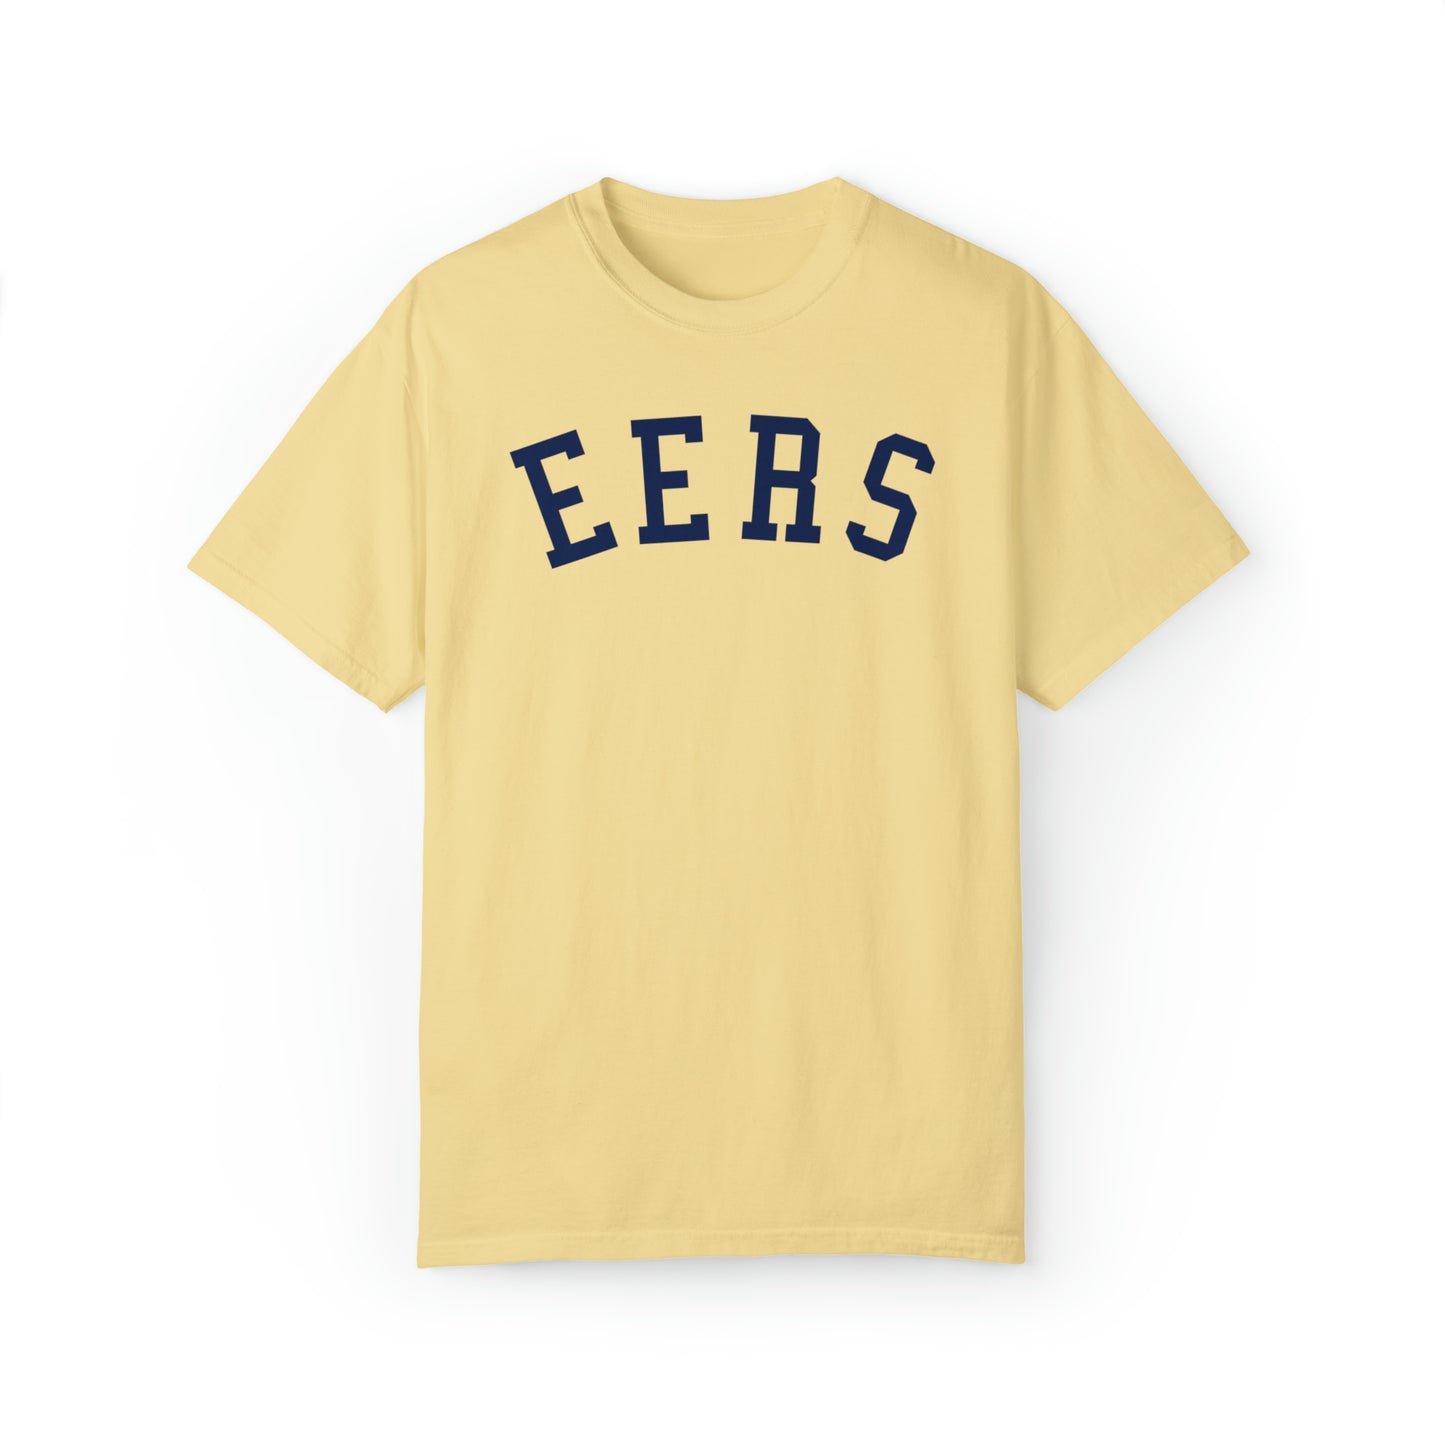 EERS-Unisex Garment-Dyed T-shirt